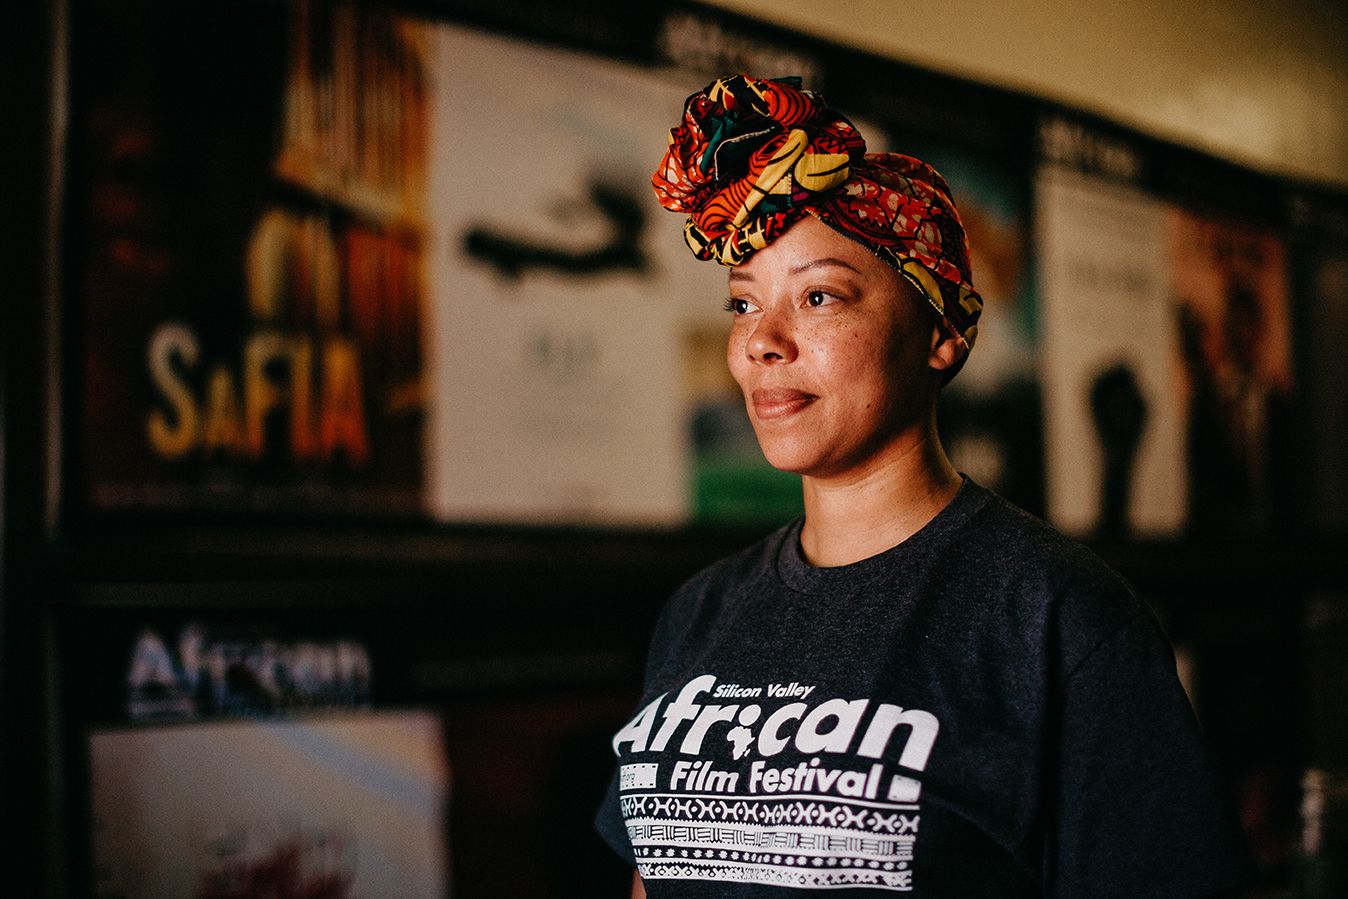 The Silicon Valley African Film Festival